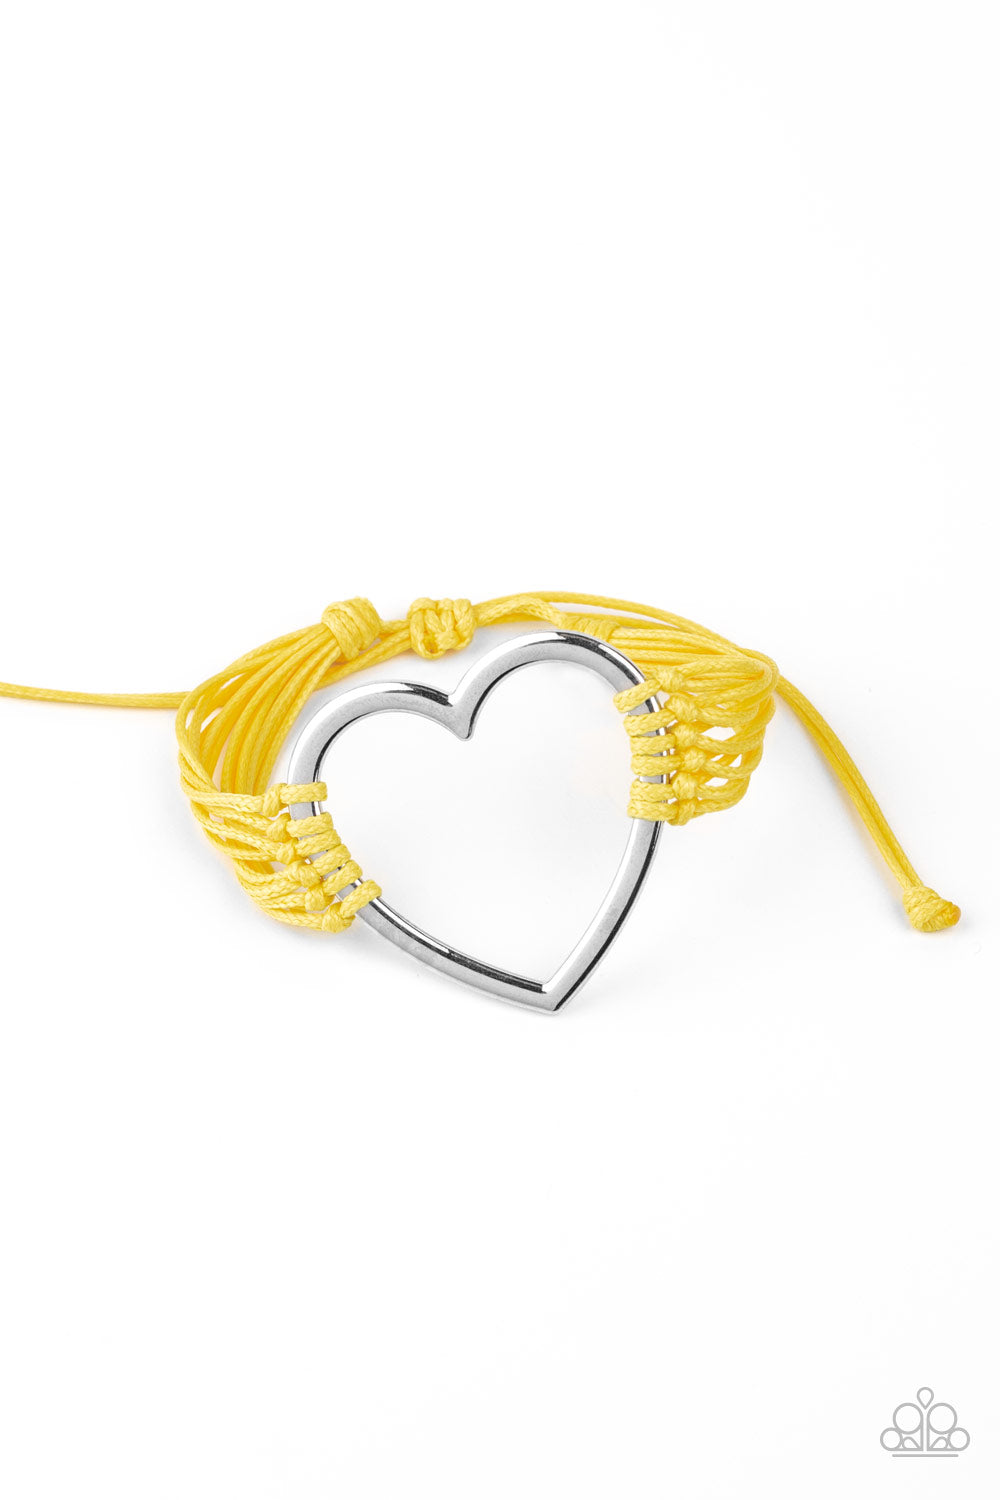 Paparazzi Accessories - Playing With My HEARTSTRINGS #B426 - Yellow Bracelet